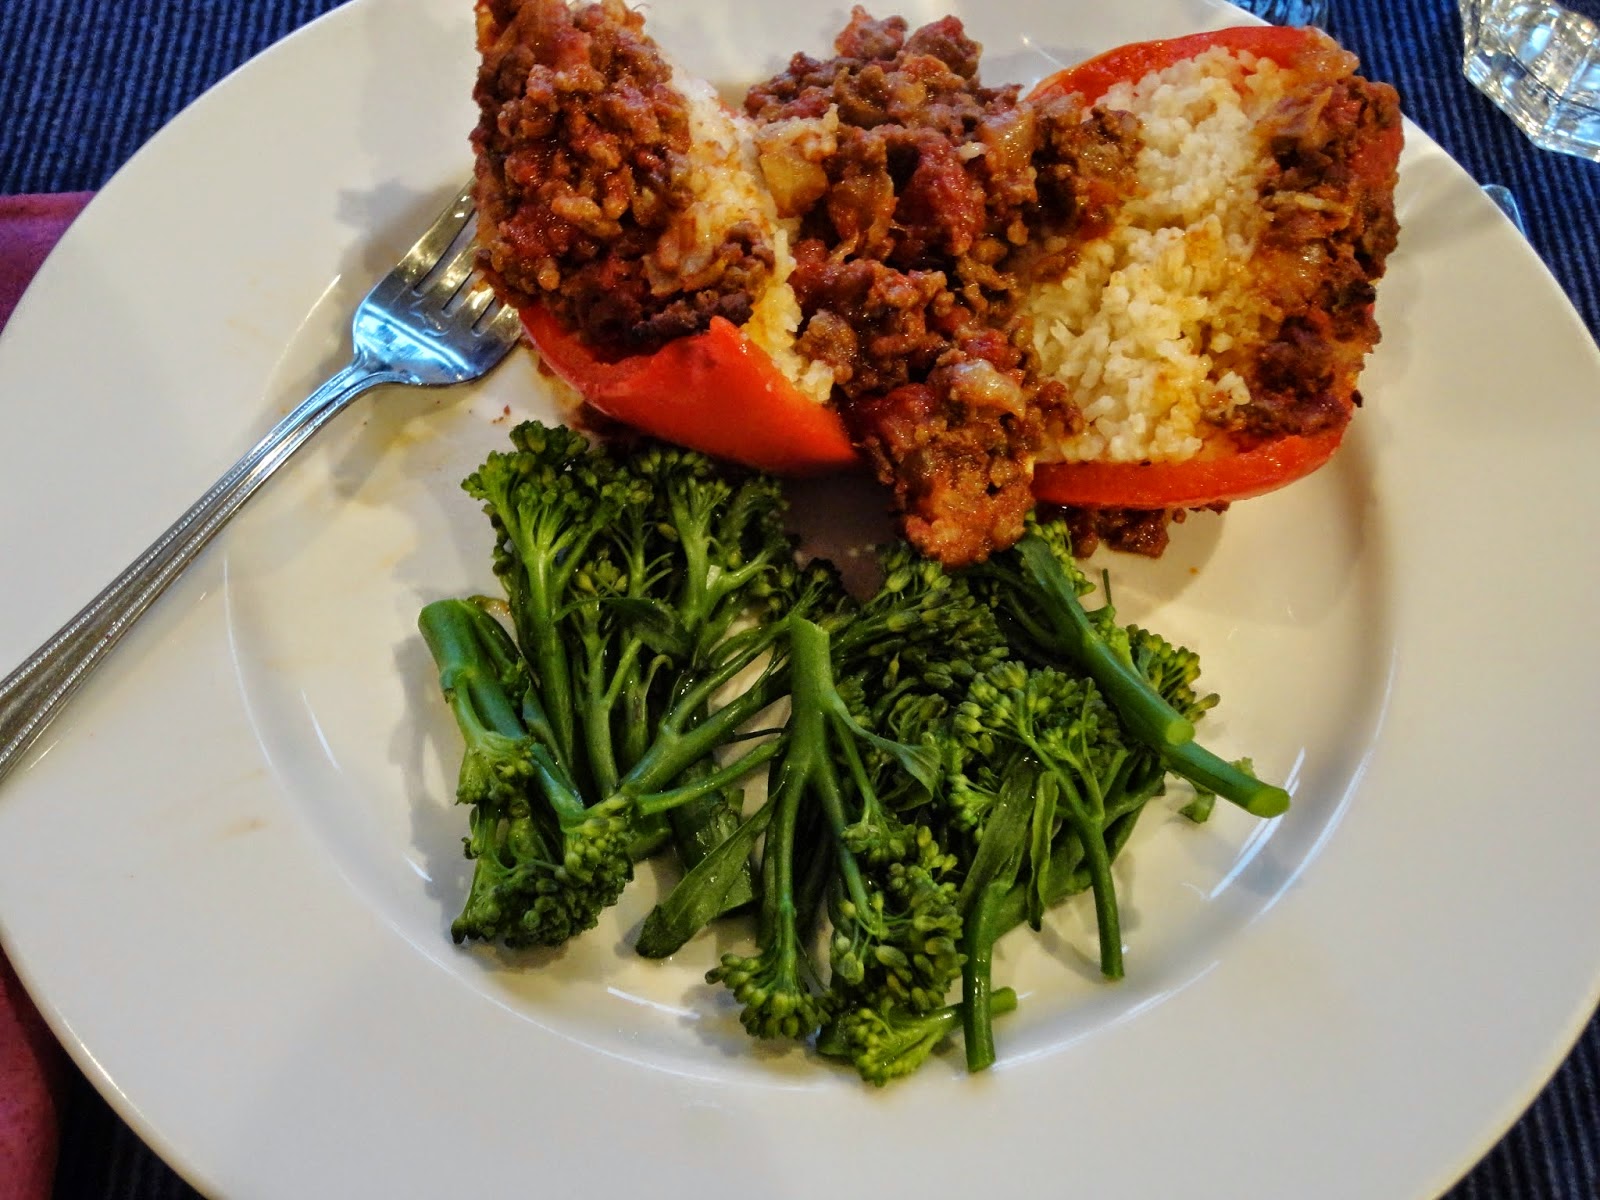 http://whoeverhasthemostfabric.blogspot.com/2014/04/family-supper-stuffed-peppers-with.html